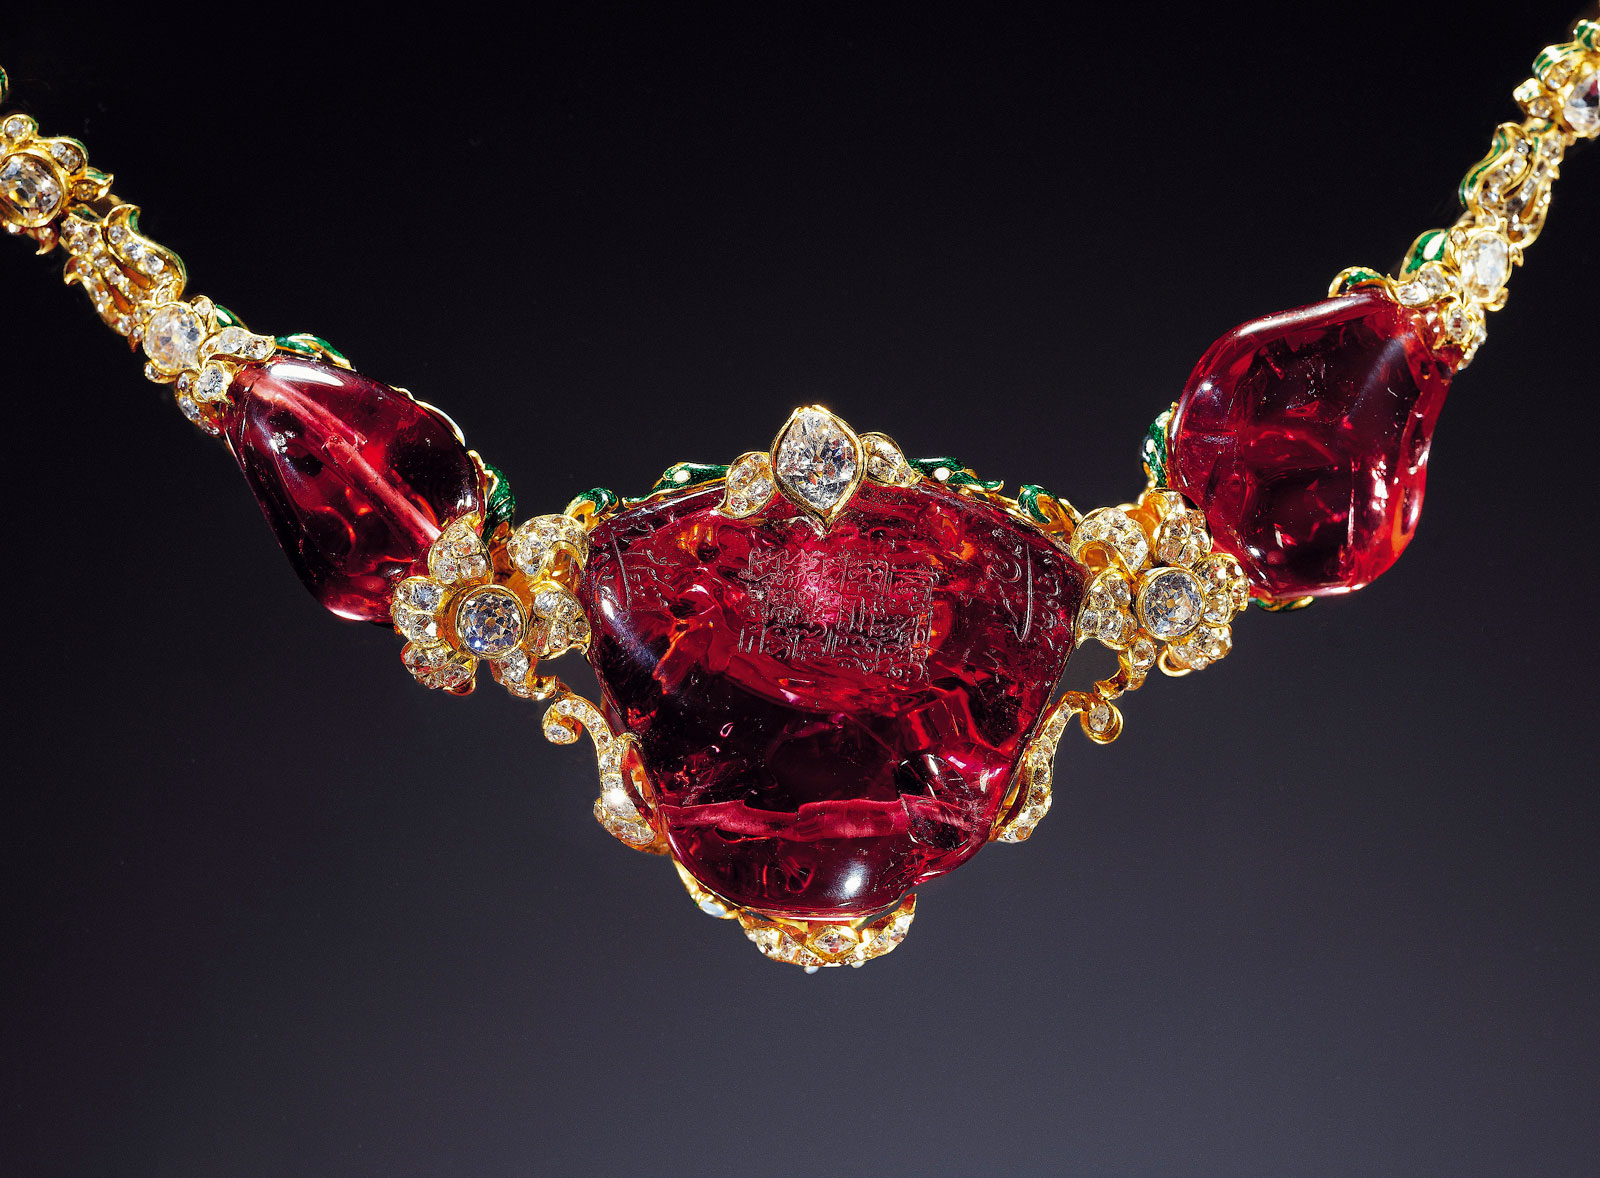 The Timur Ruby. Currently in the private collection of the British Queen, the idea that it was once in the possession of Timur has now been debunked (Stronge, 1996).